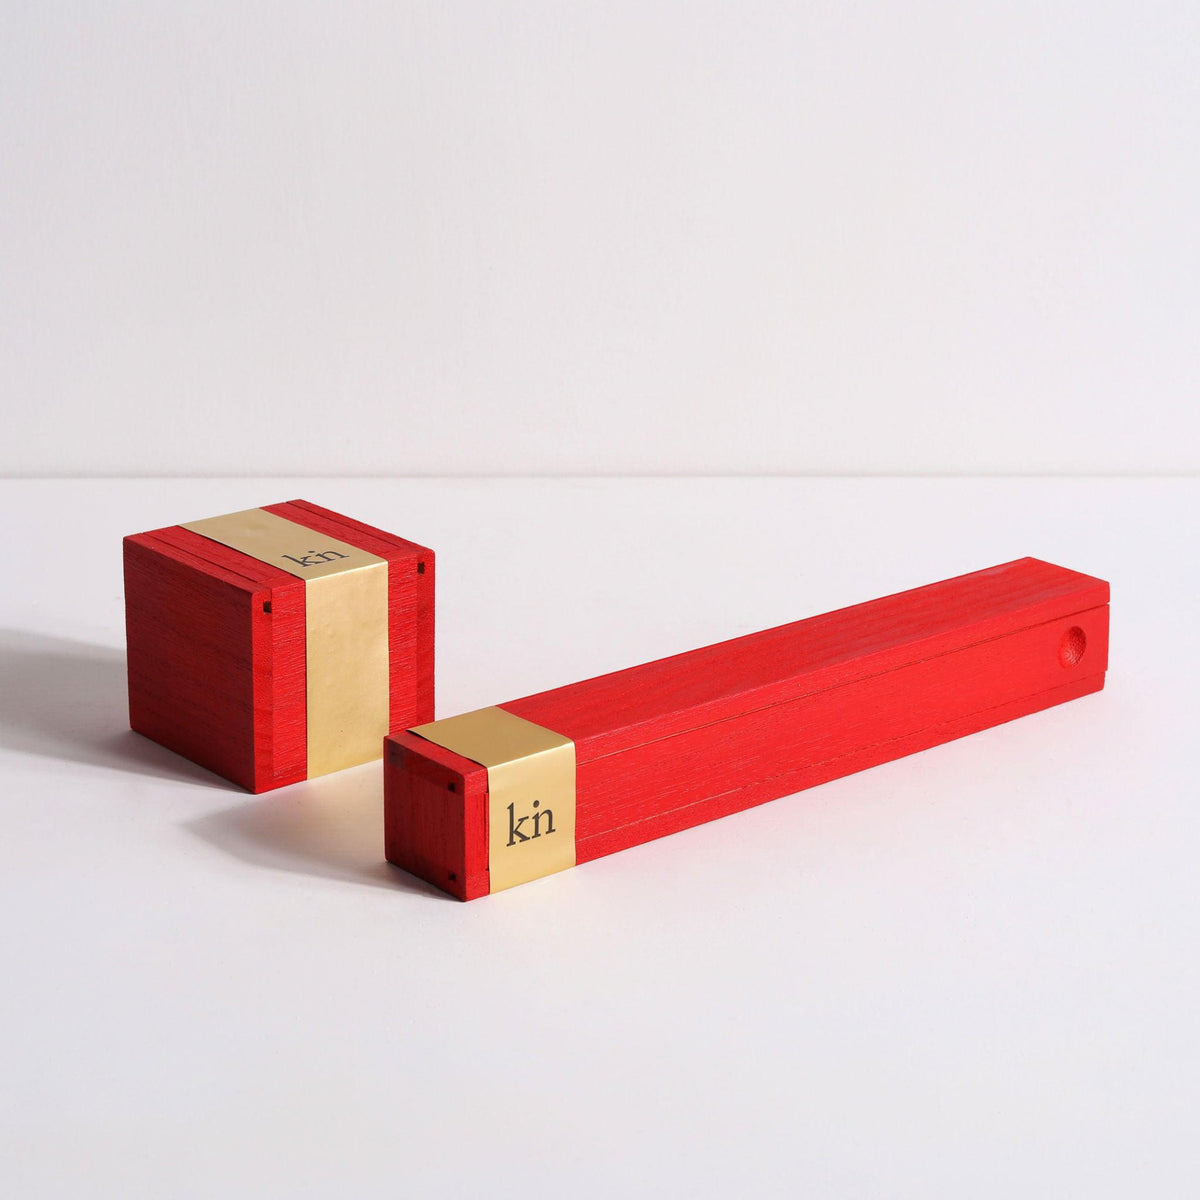 Wutong boxes for incense cones and sticks by Kin Objects